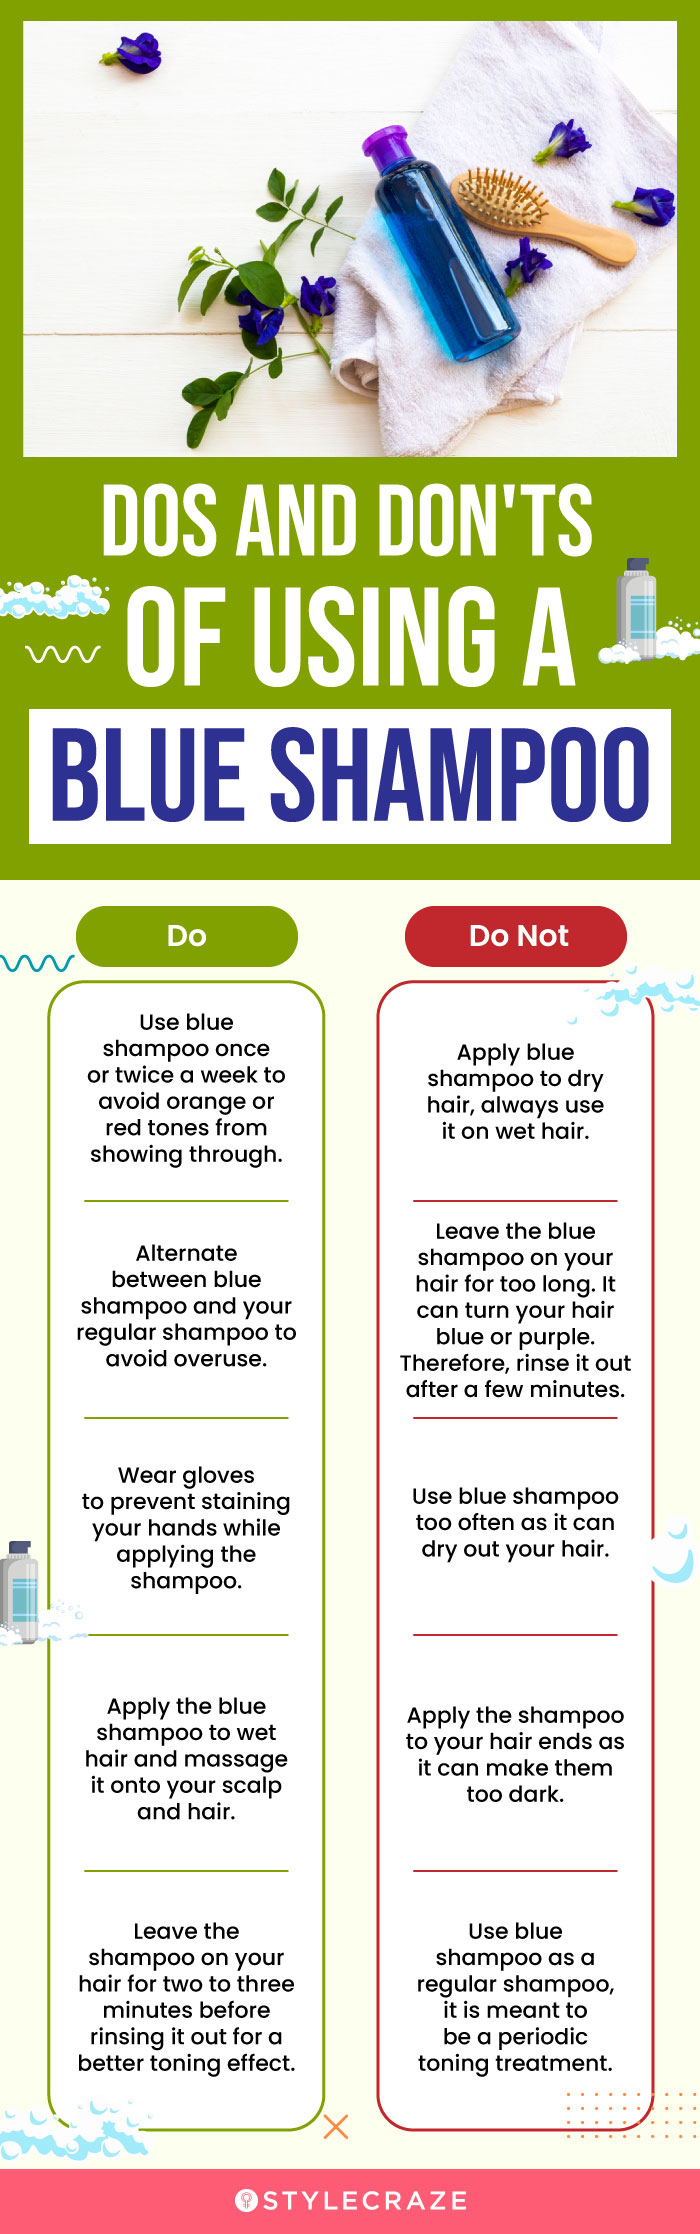 Dos And Don'ts Of Using A Blue Shampoo (infographic)